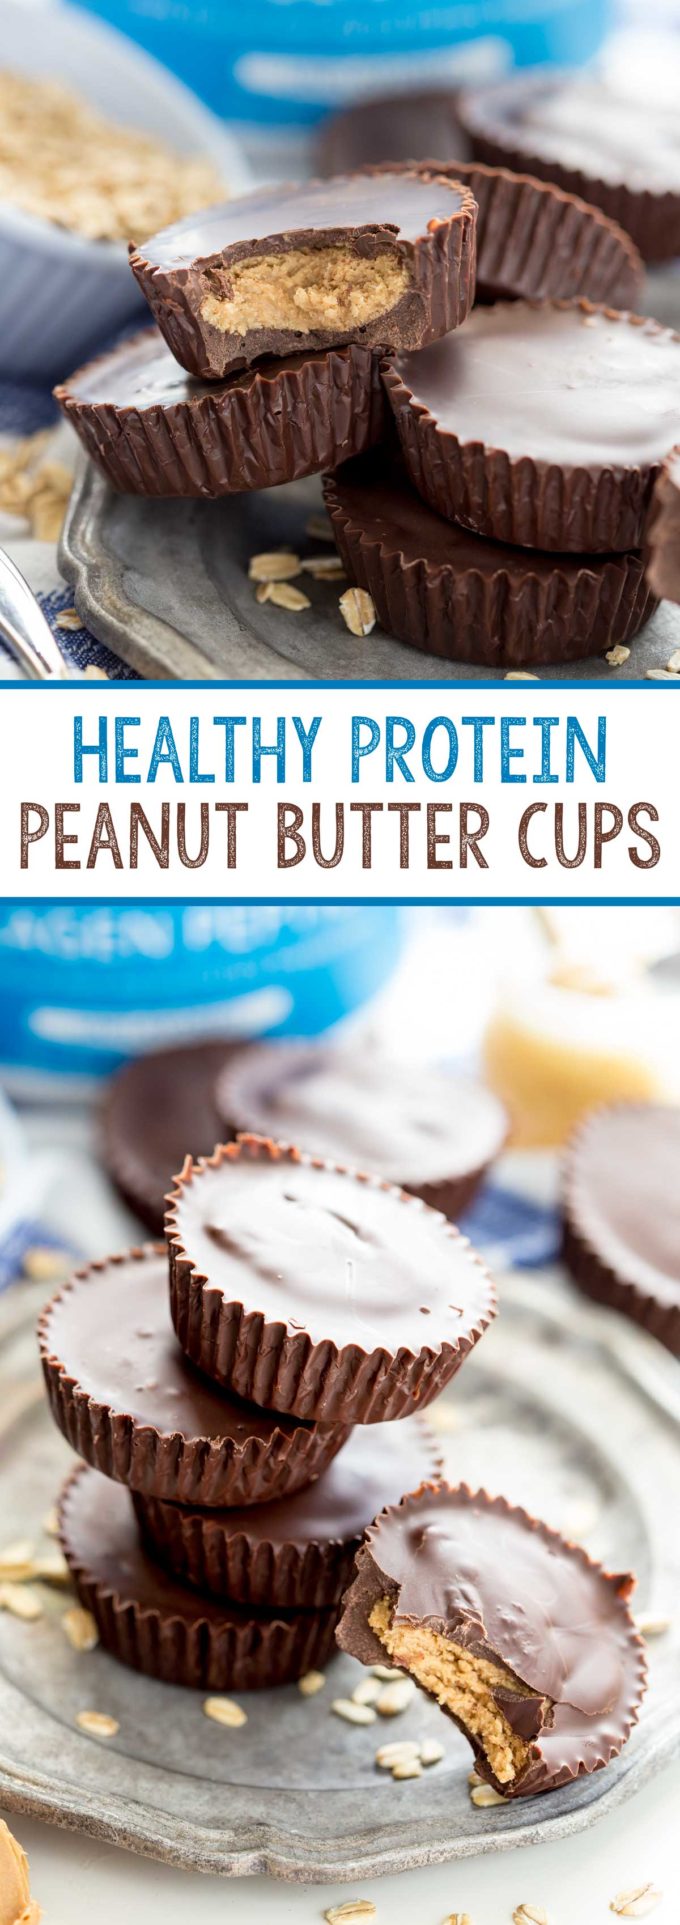 homemade delicious and healthy peanut butter cups. Rich dark chocolate, creamy peanut butter filling, and a healthy serving of protein per peanut butter cup